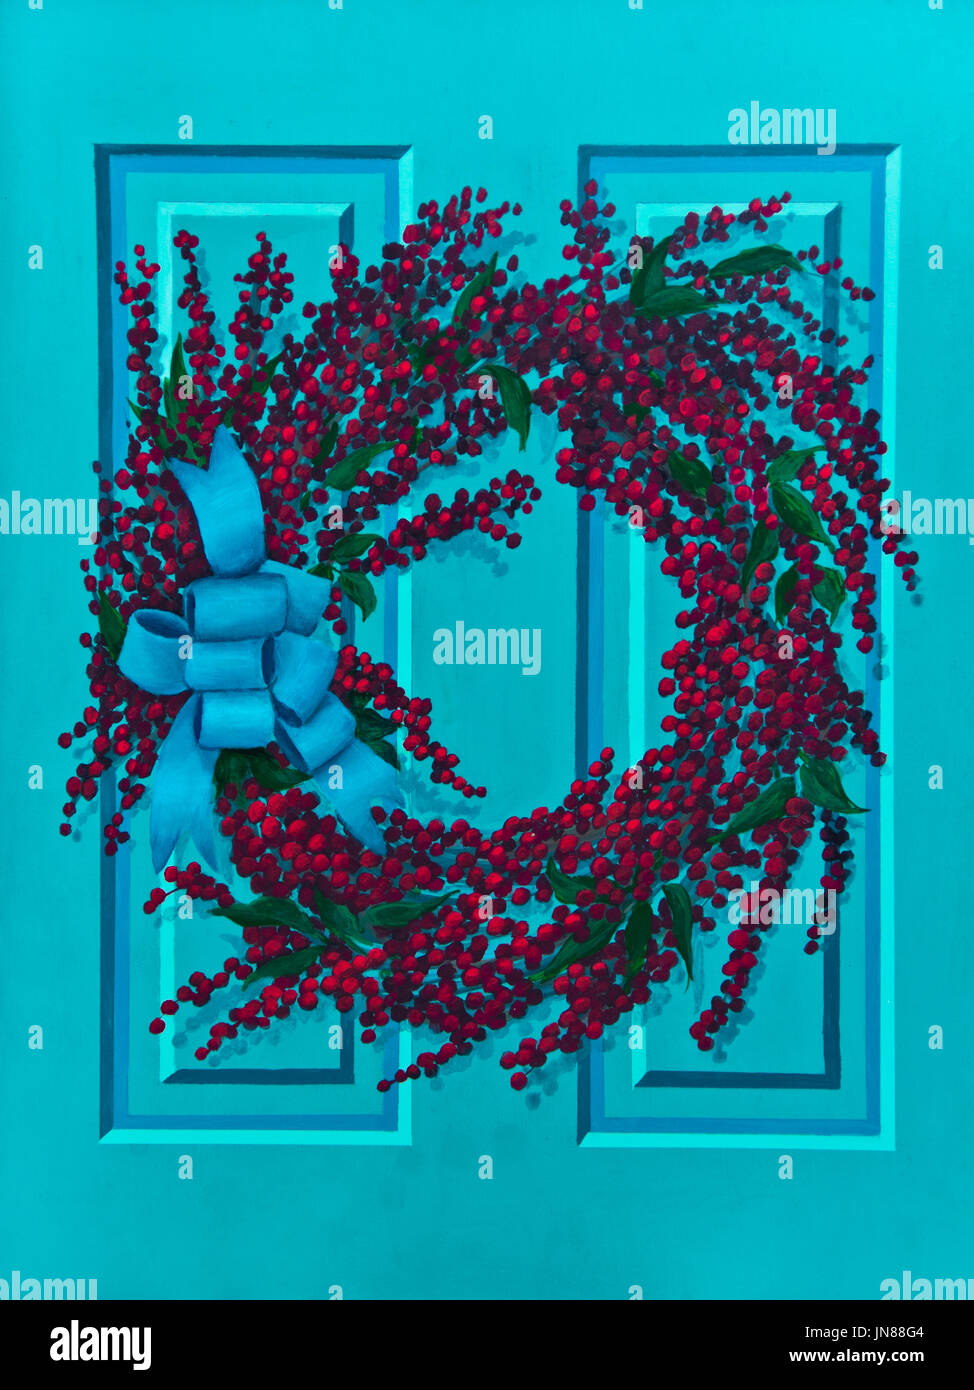 A blue-green paneled door has a red berry  wreath and a blue-green bow in an acrylic painting. Stock Photo